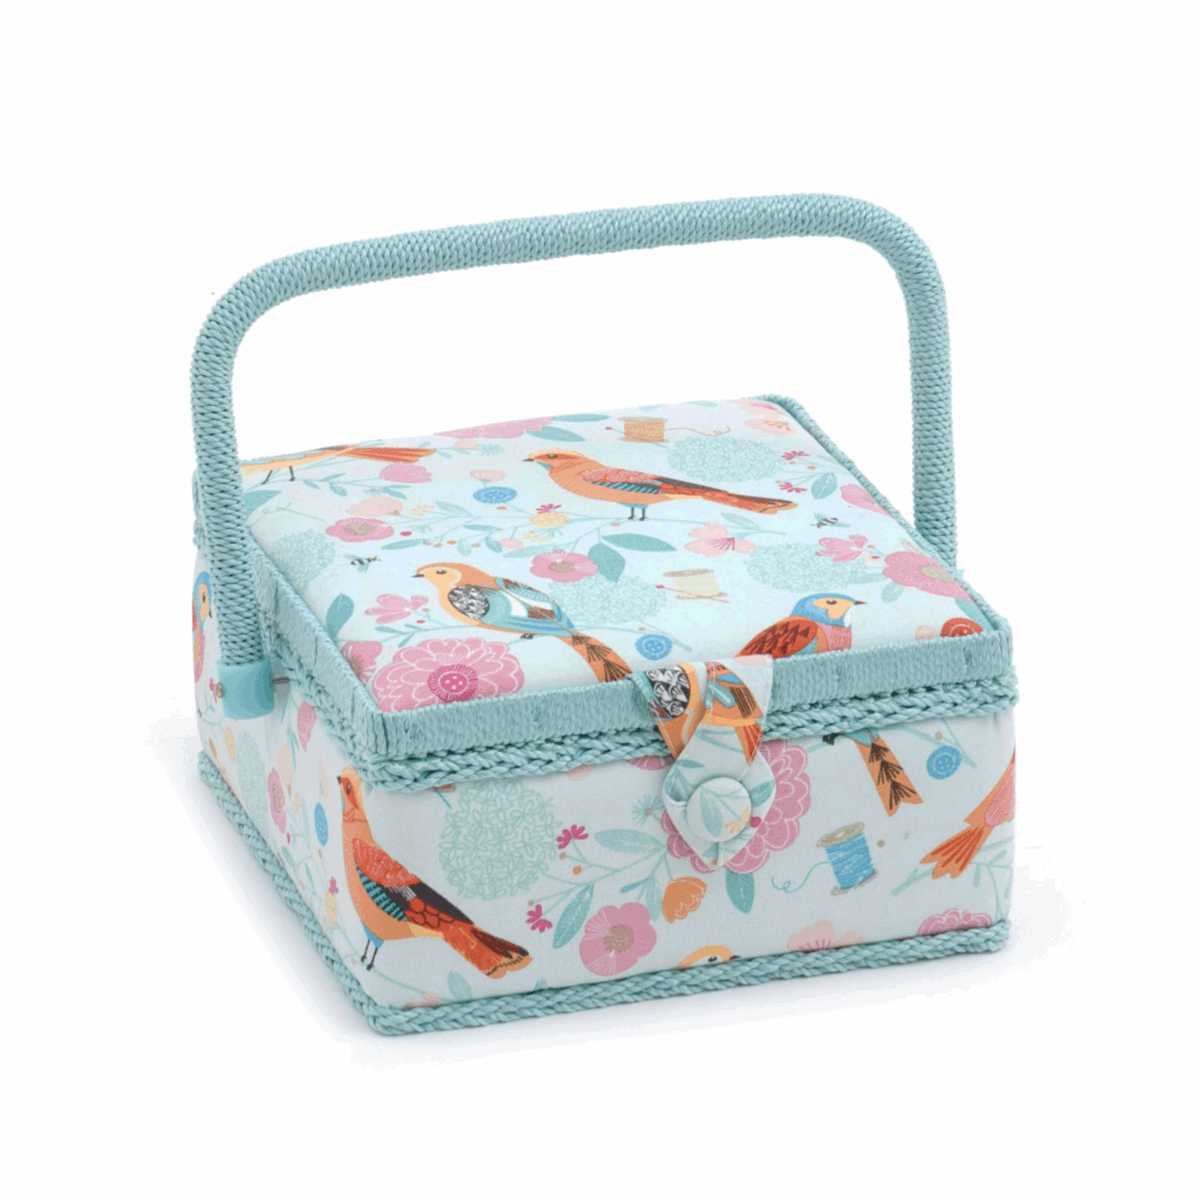 Birdsong Sewing Box - Small Square